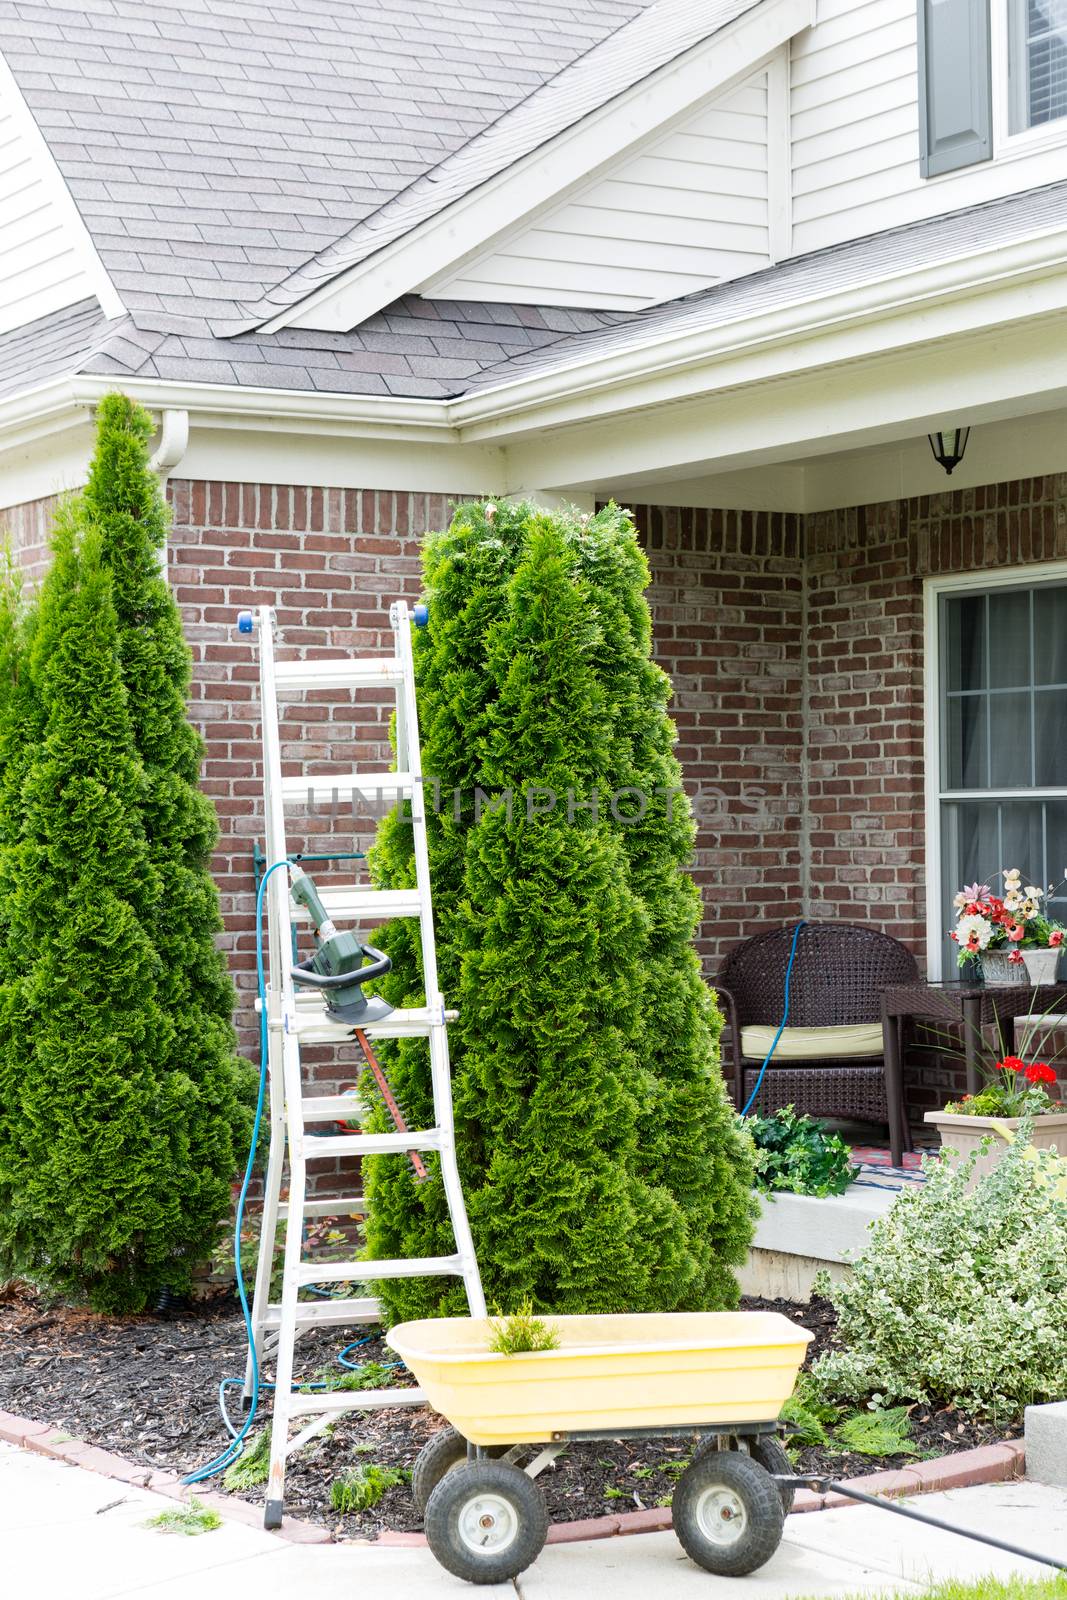 Yard work around the house with a stepladder standing alongside an Arborvitae or Thuja tree with a small yellow metal cart for removing the branches trimmed off to maintain its tapering shape